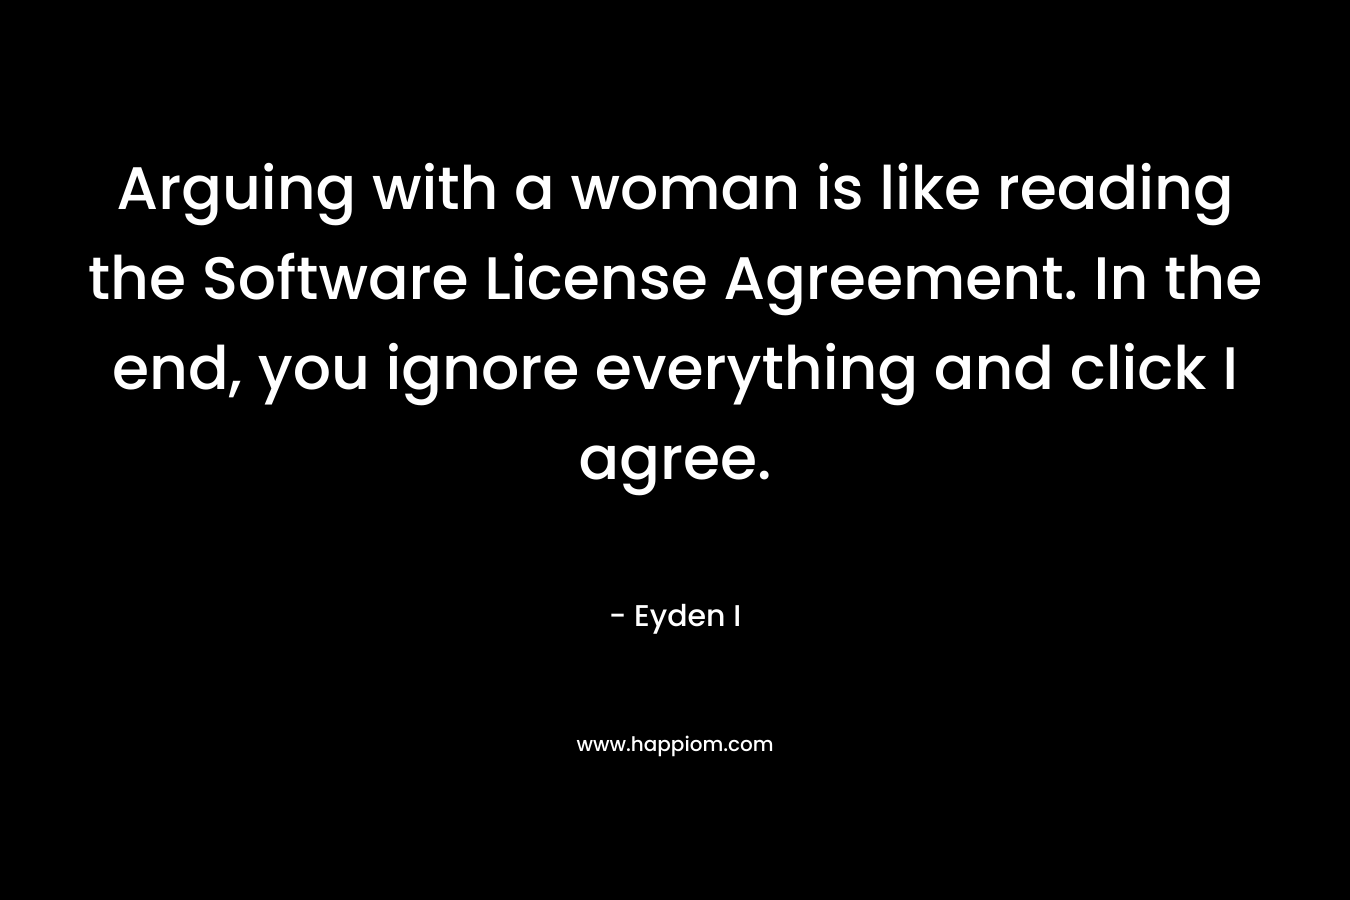 Arguing with a woman is like reading the Software License Agreement. In the end, you ignore everything and click I agree. – Eyden I